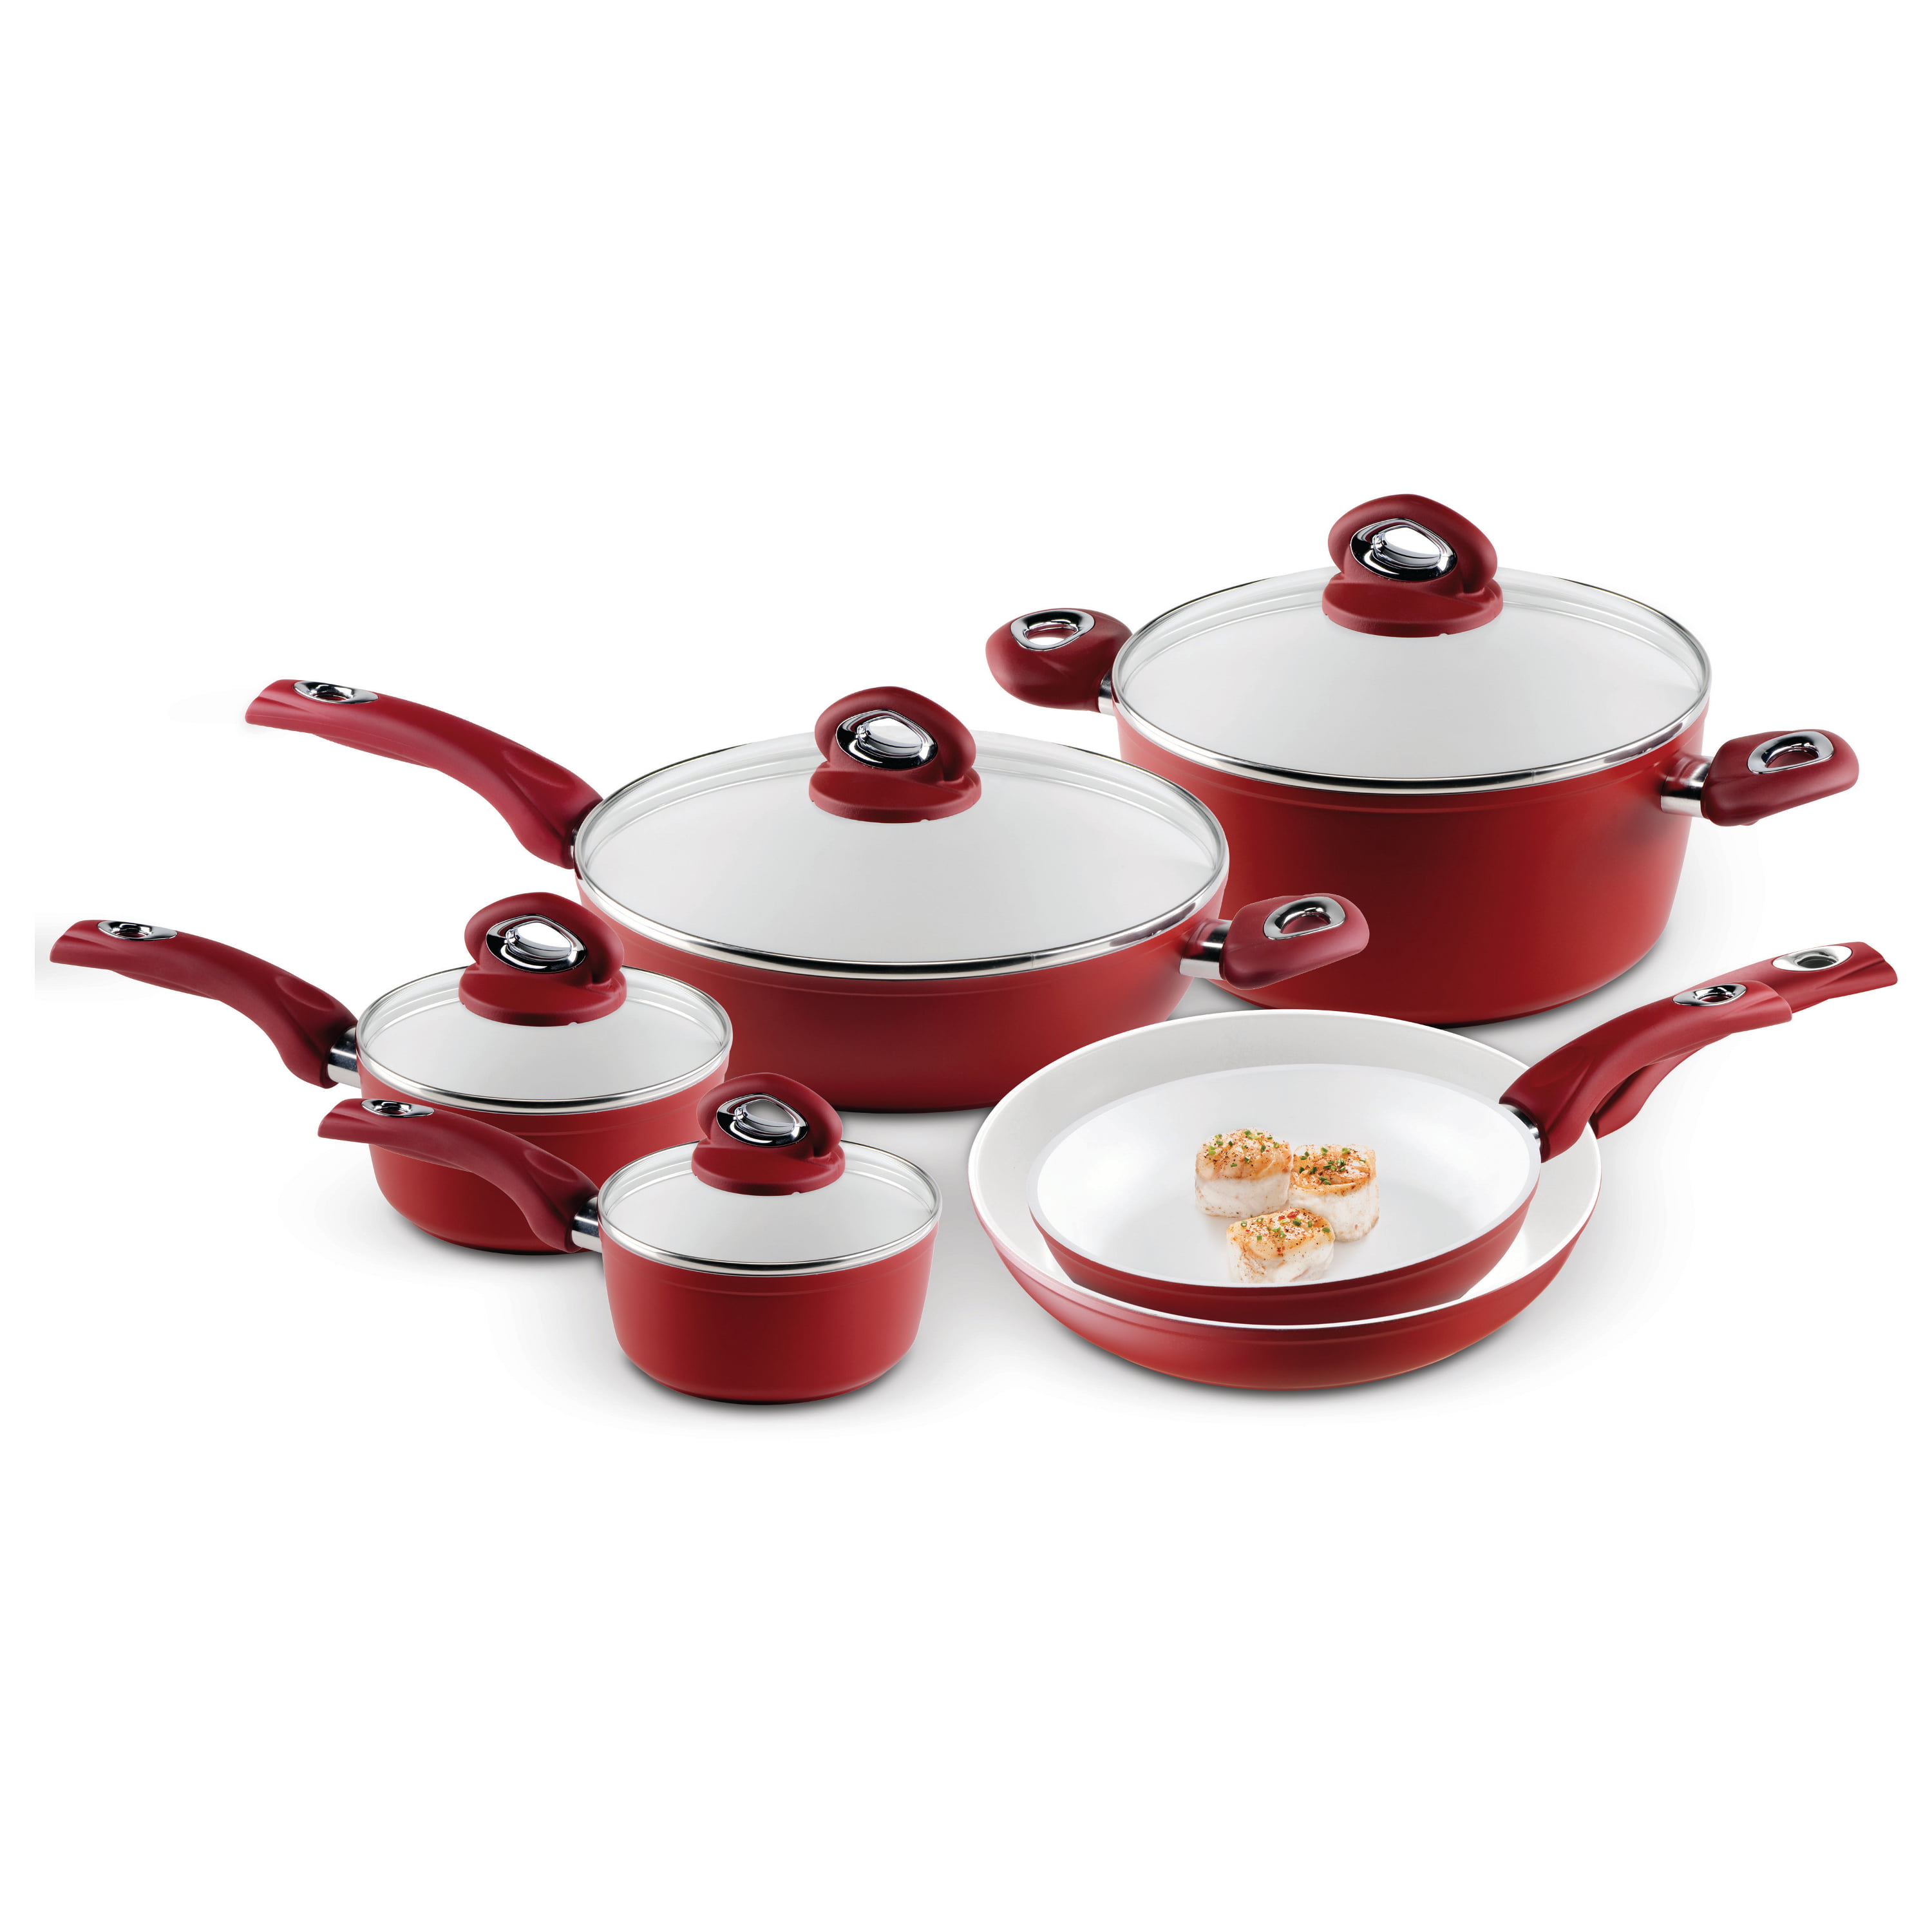 Bialetti Aeternum Cookware Set in Red - Elevate Your Culinary Skills